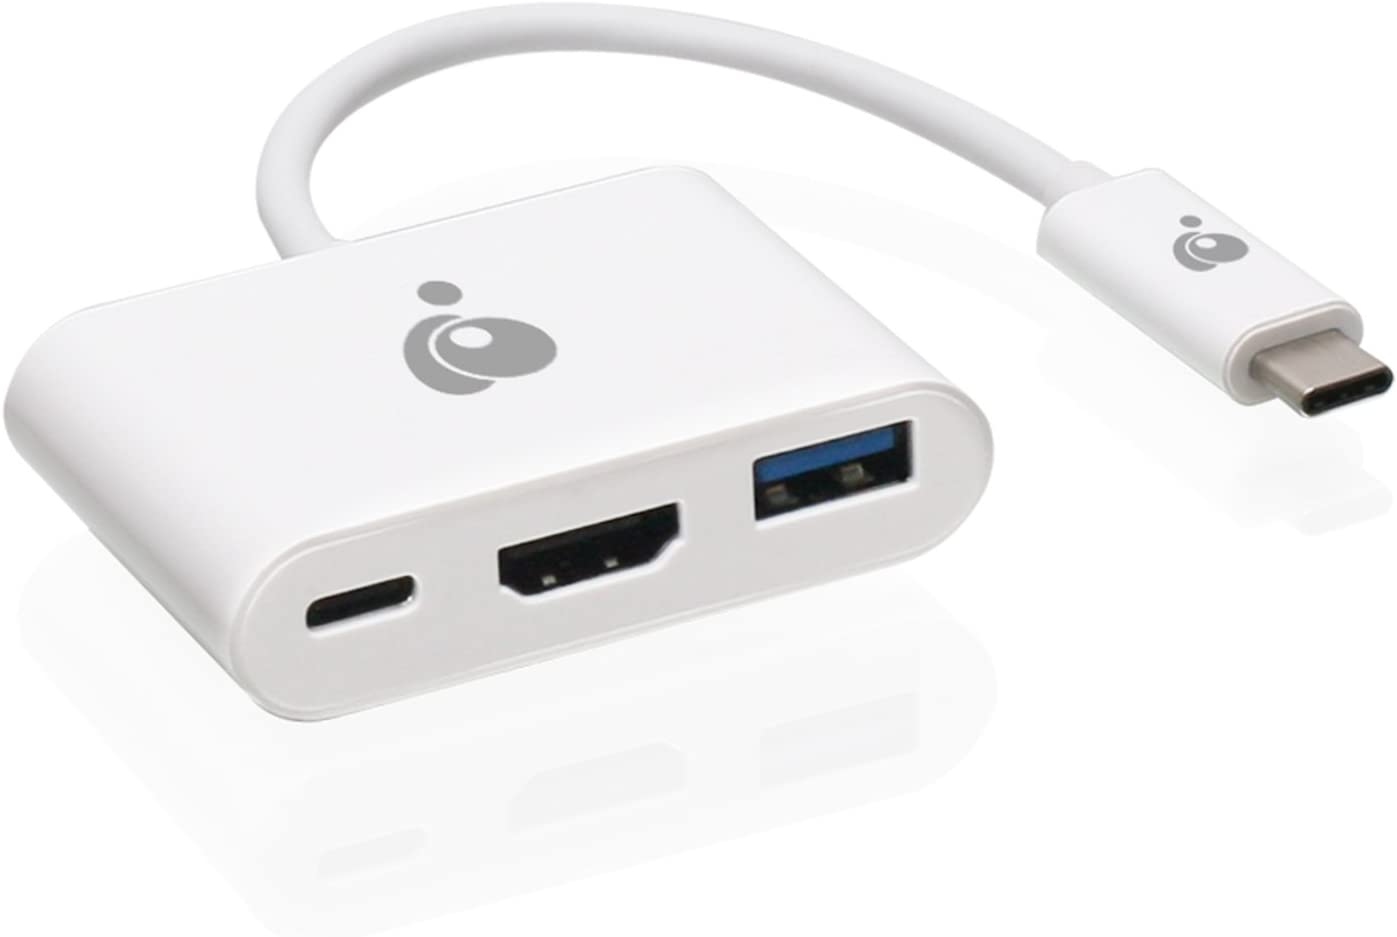 IOGEAR USB-C to 1 to 3 Adapter - 1 HDMI Out - 1 USB A Out - 1 USB-C - Power Delivery 100W - 4K@30Hz - MacBook Pro - iMac - Chromebook - More USB 3.0 Type-C Devices - GUC3C3H